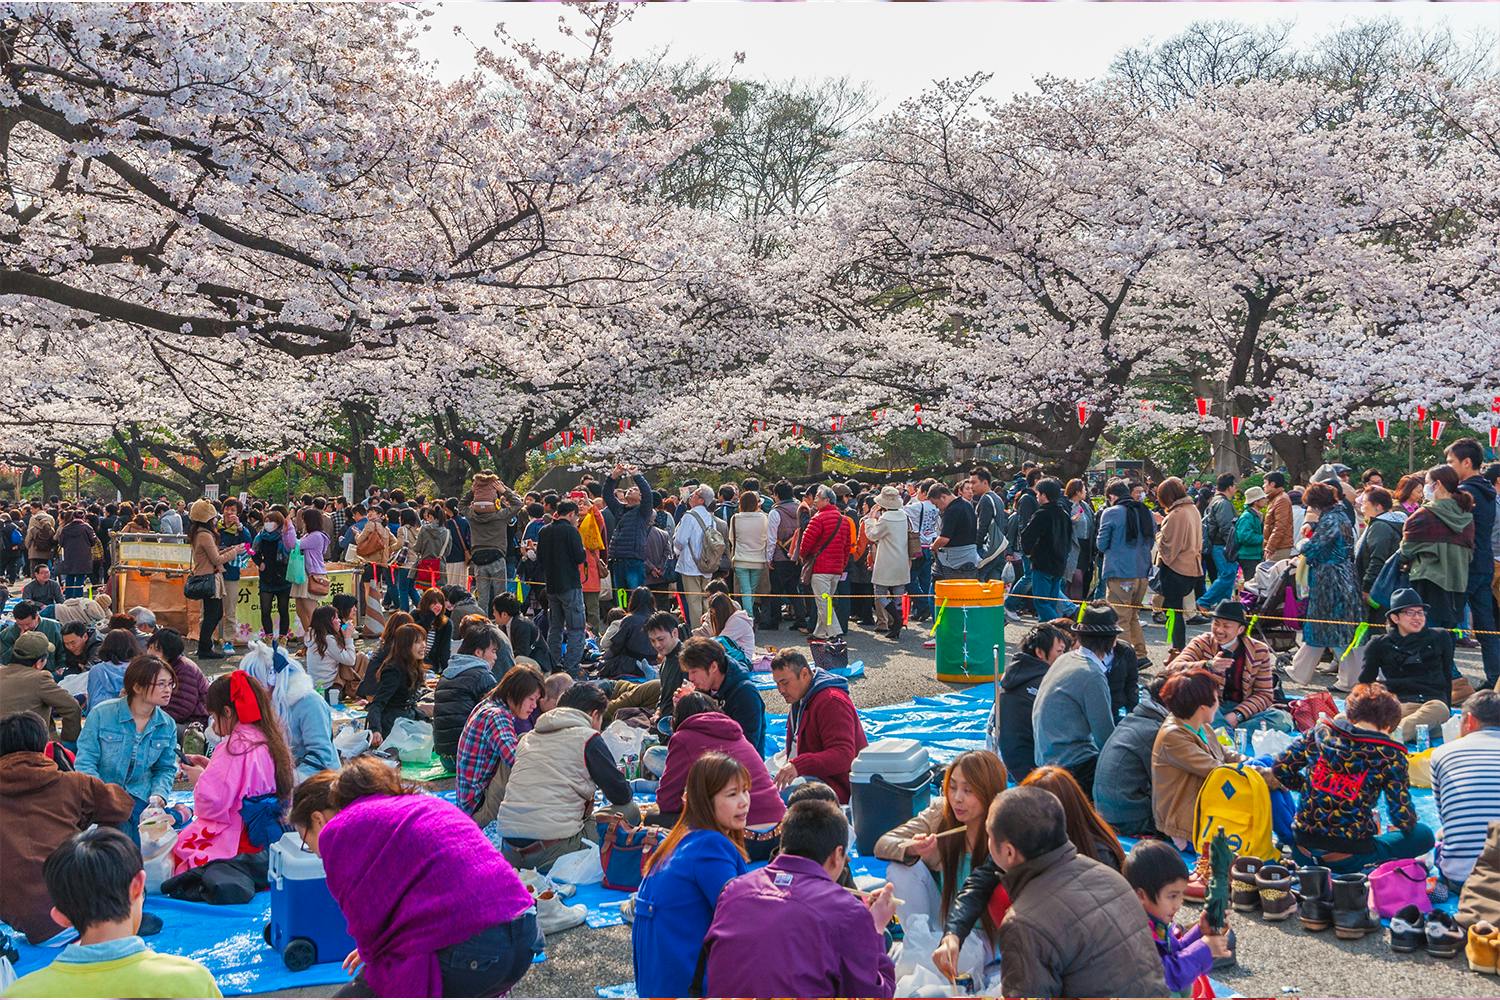 A hanami, or cherry blossom-viewing, scene in Japan, taking place in a park with lots of people and cherry blossom trees.